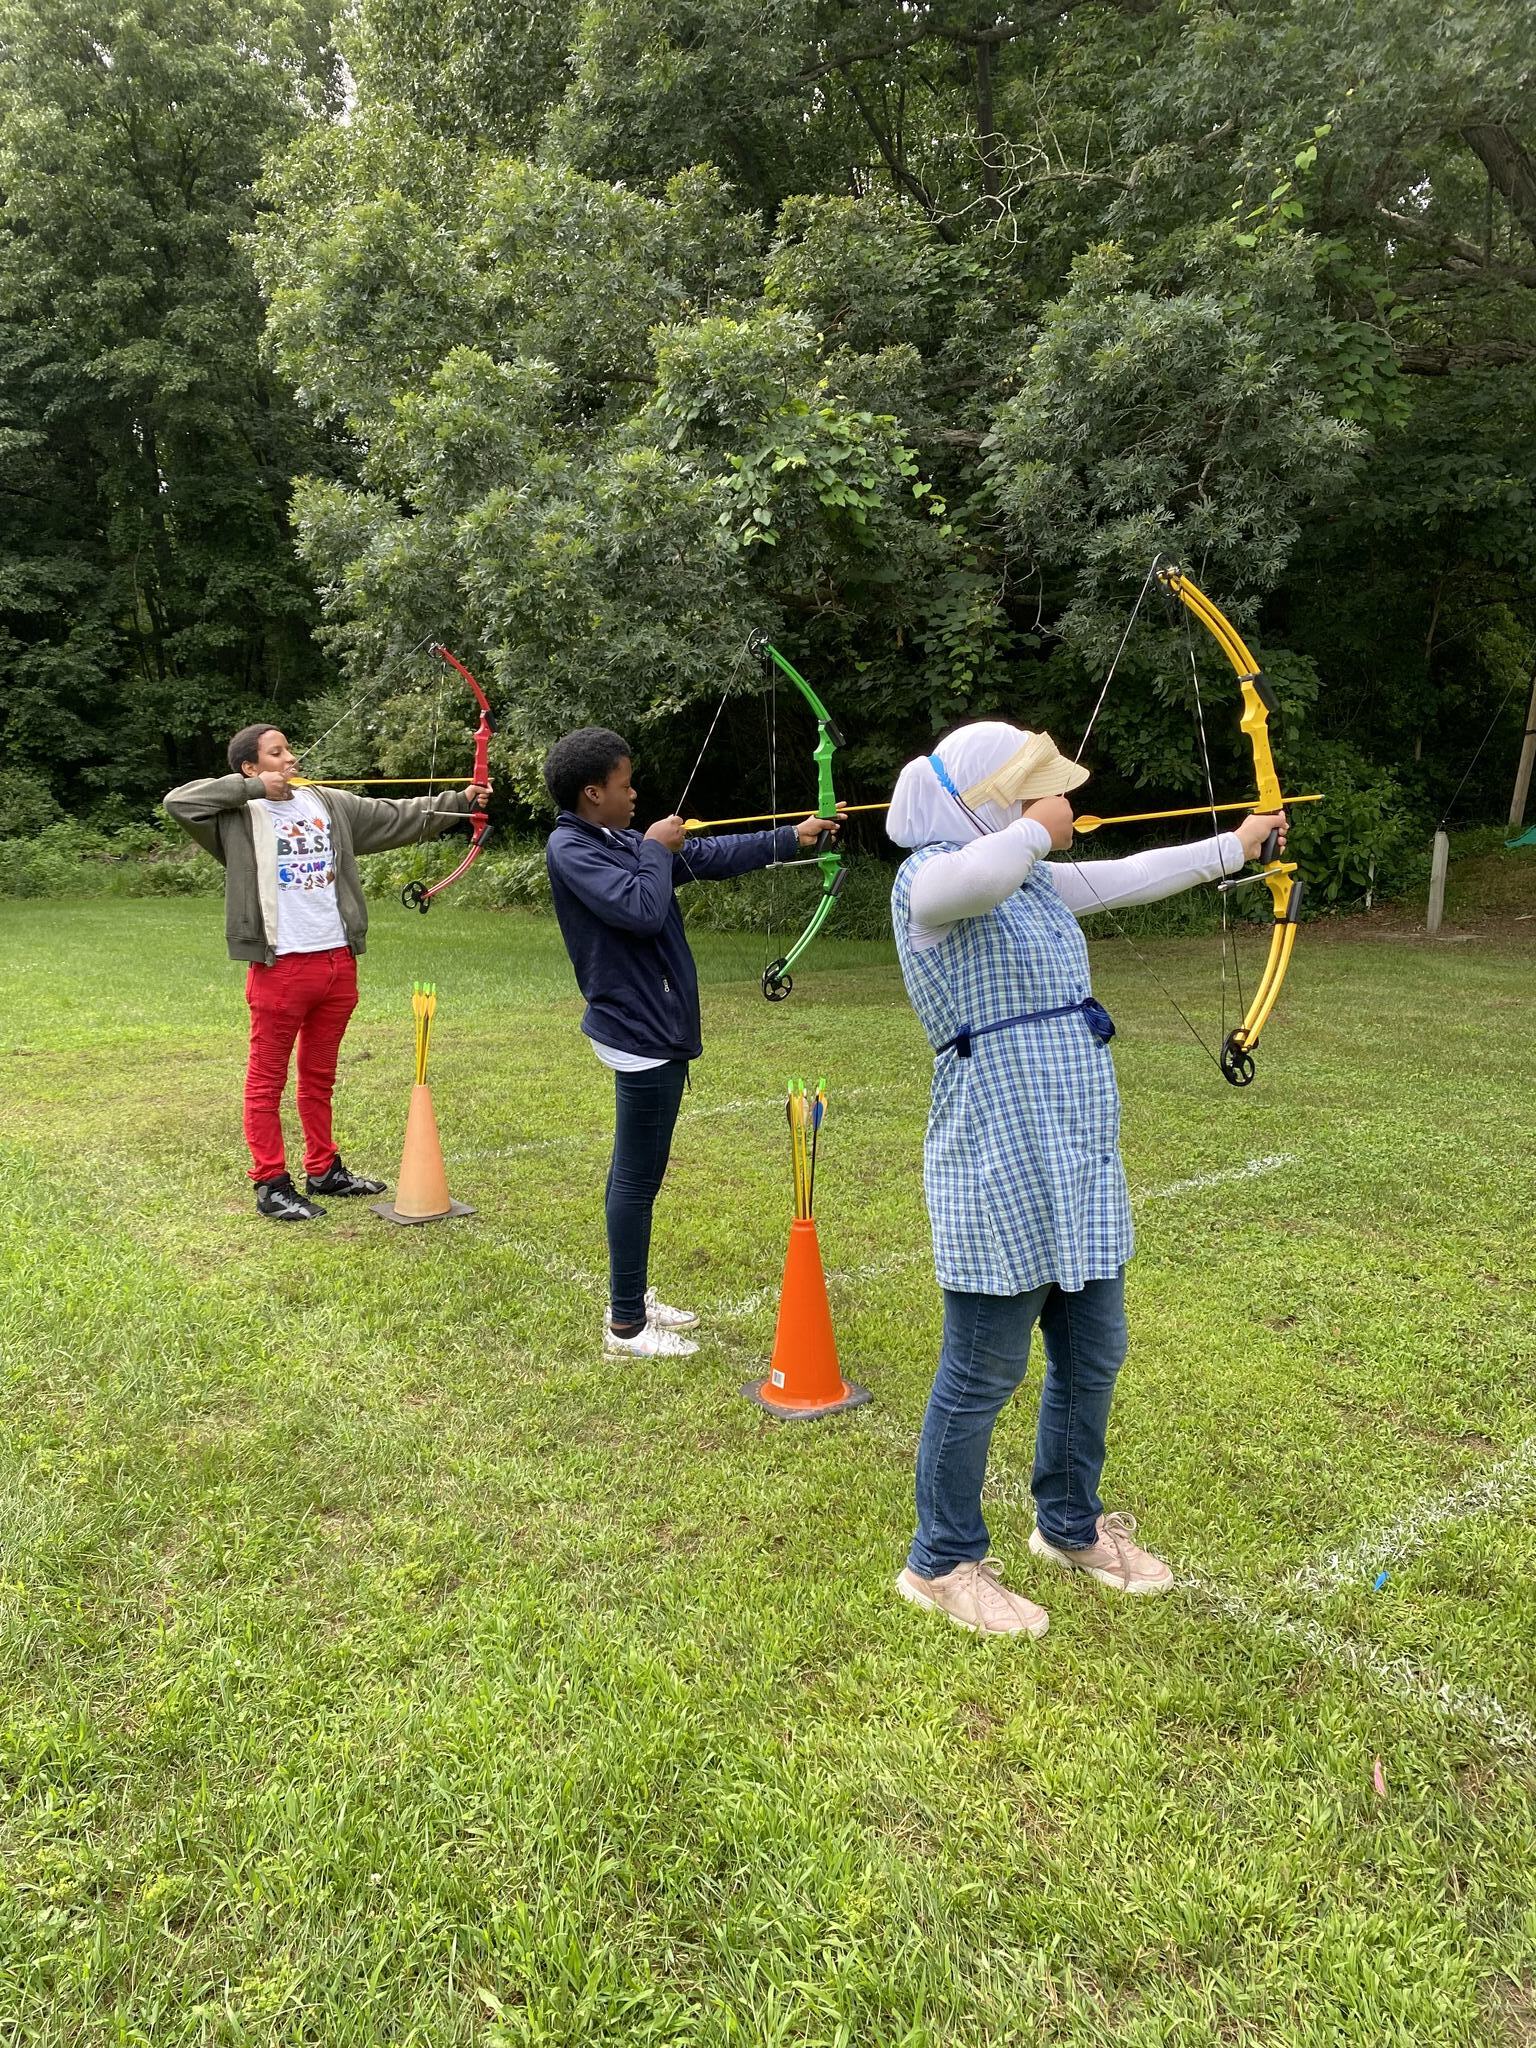 Three students standing ready to shoot an arrow at an outdoor archery range